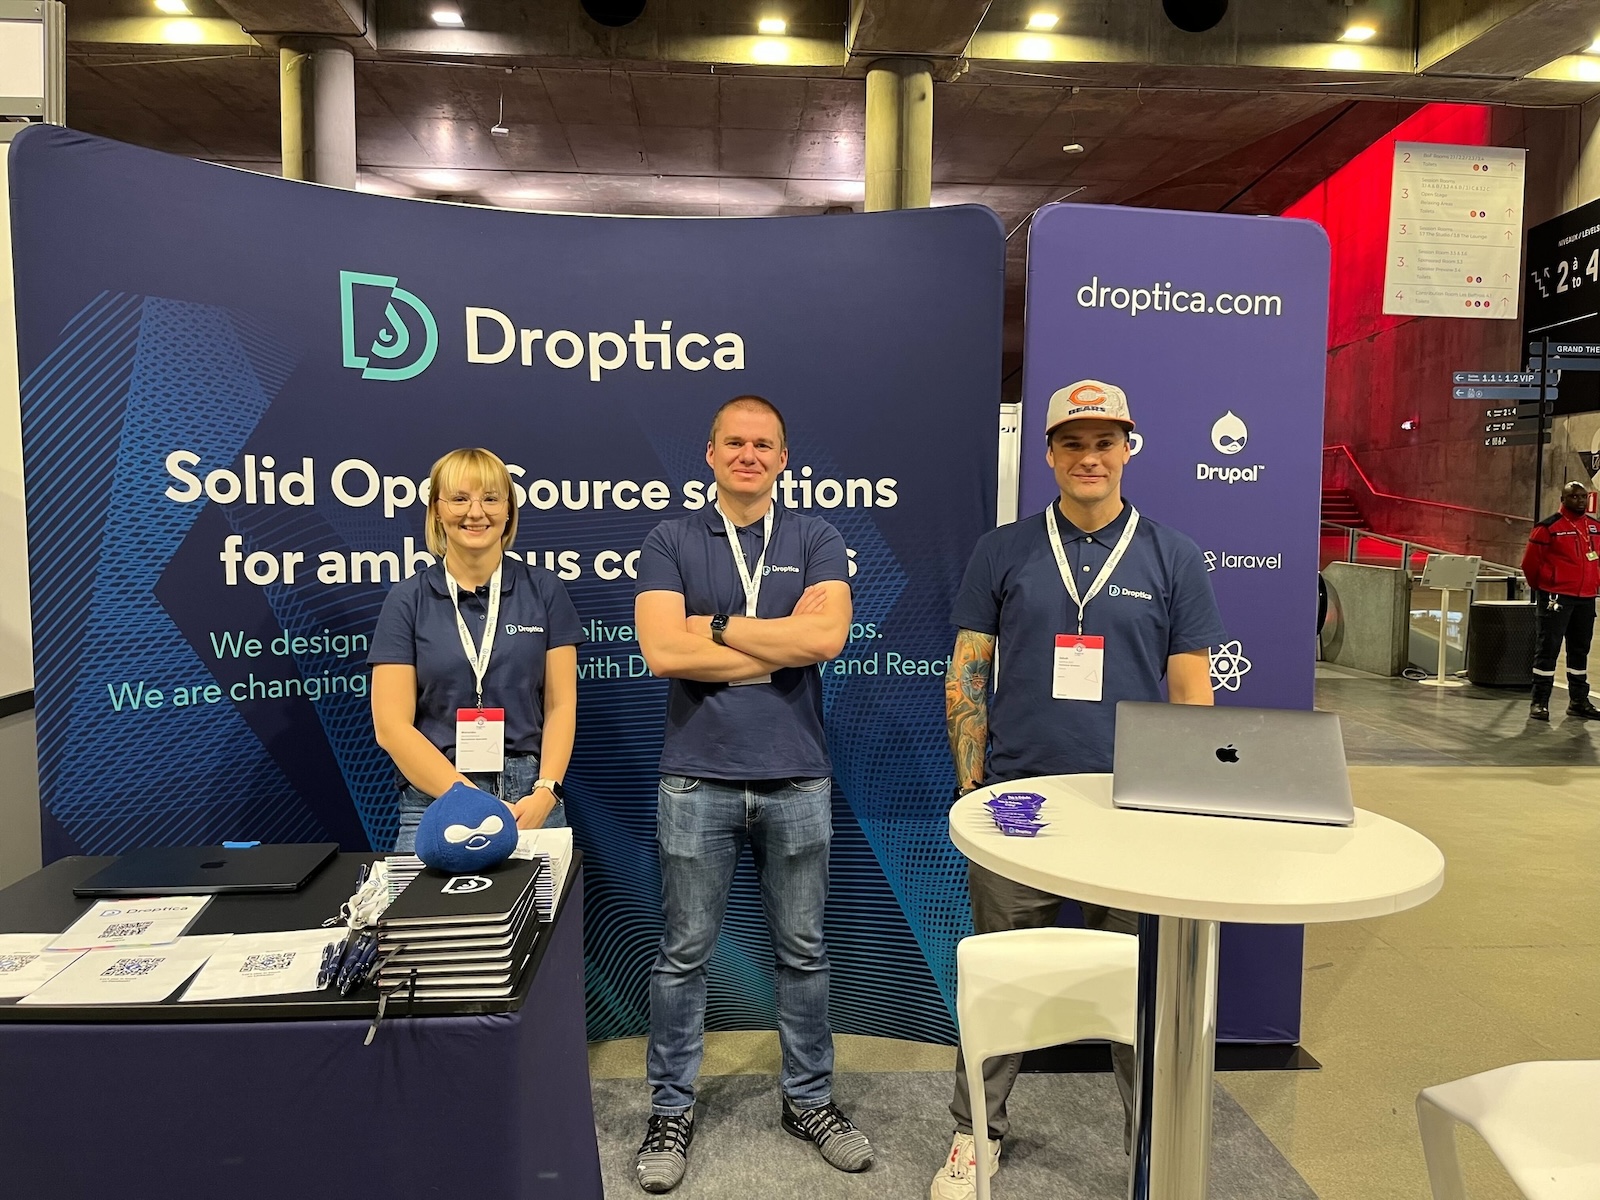 The Droptica team traveled to Lille in October 2023 for the DrupalCon Europe technology conference